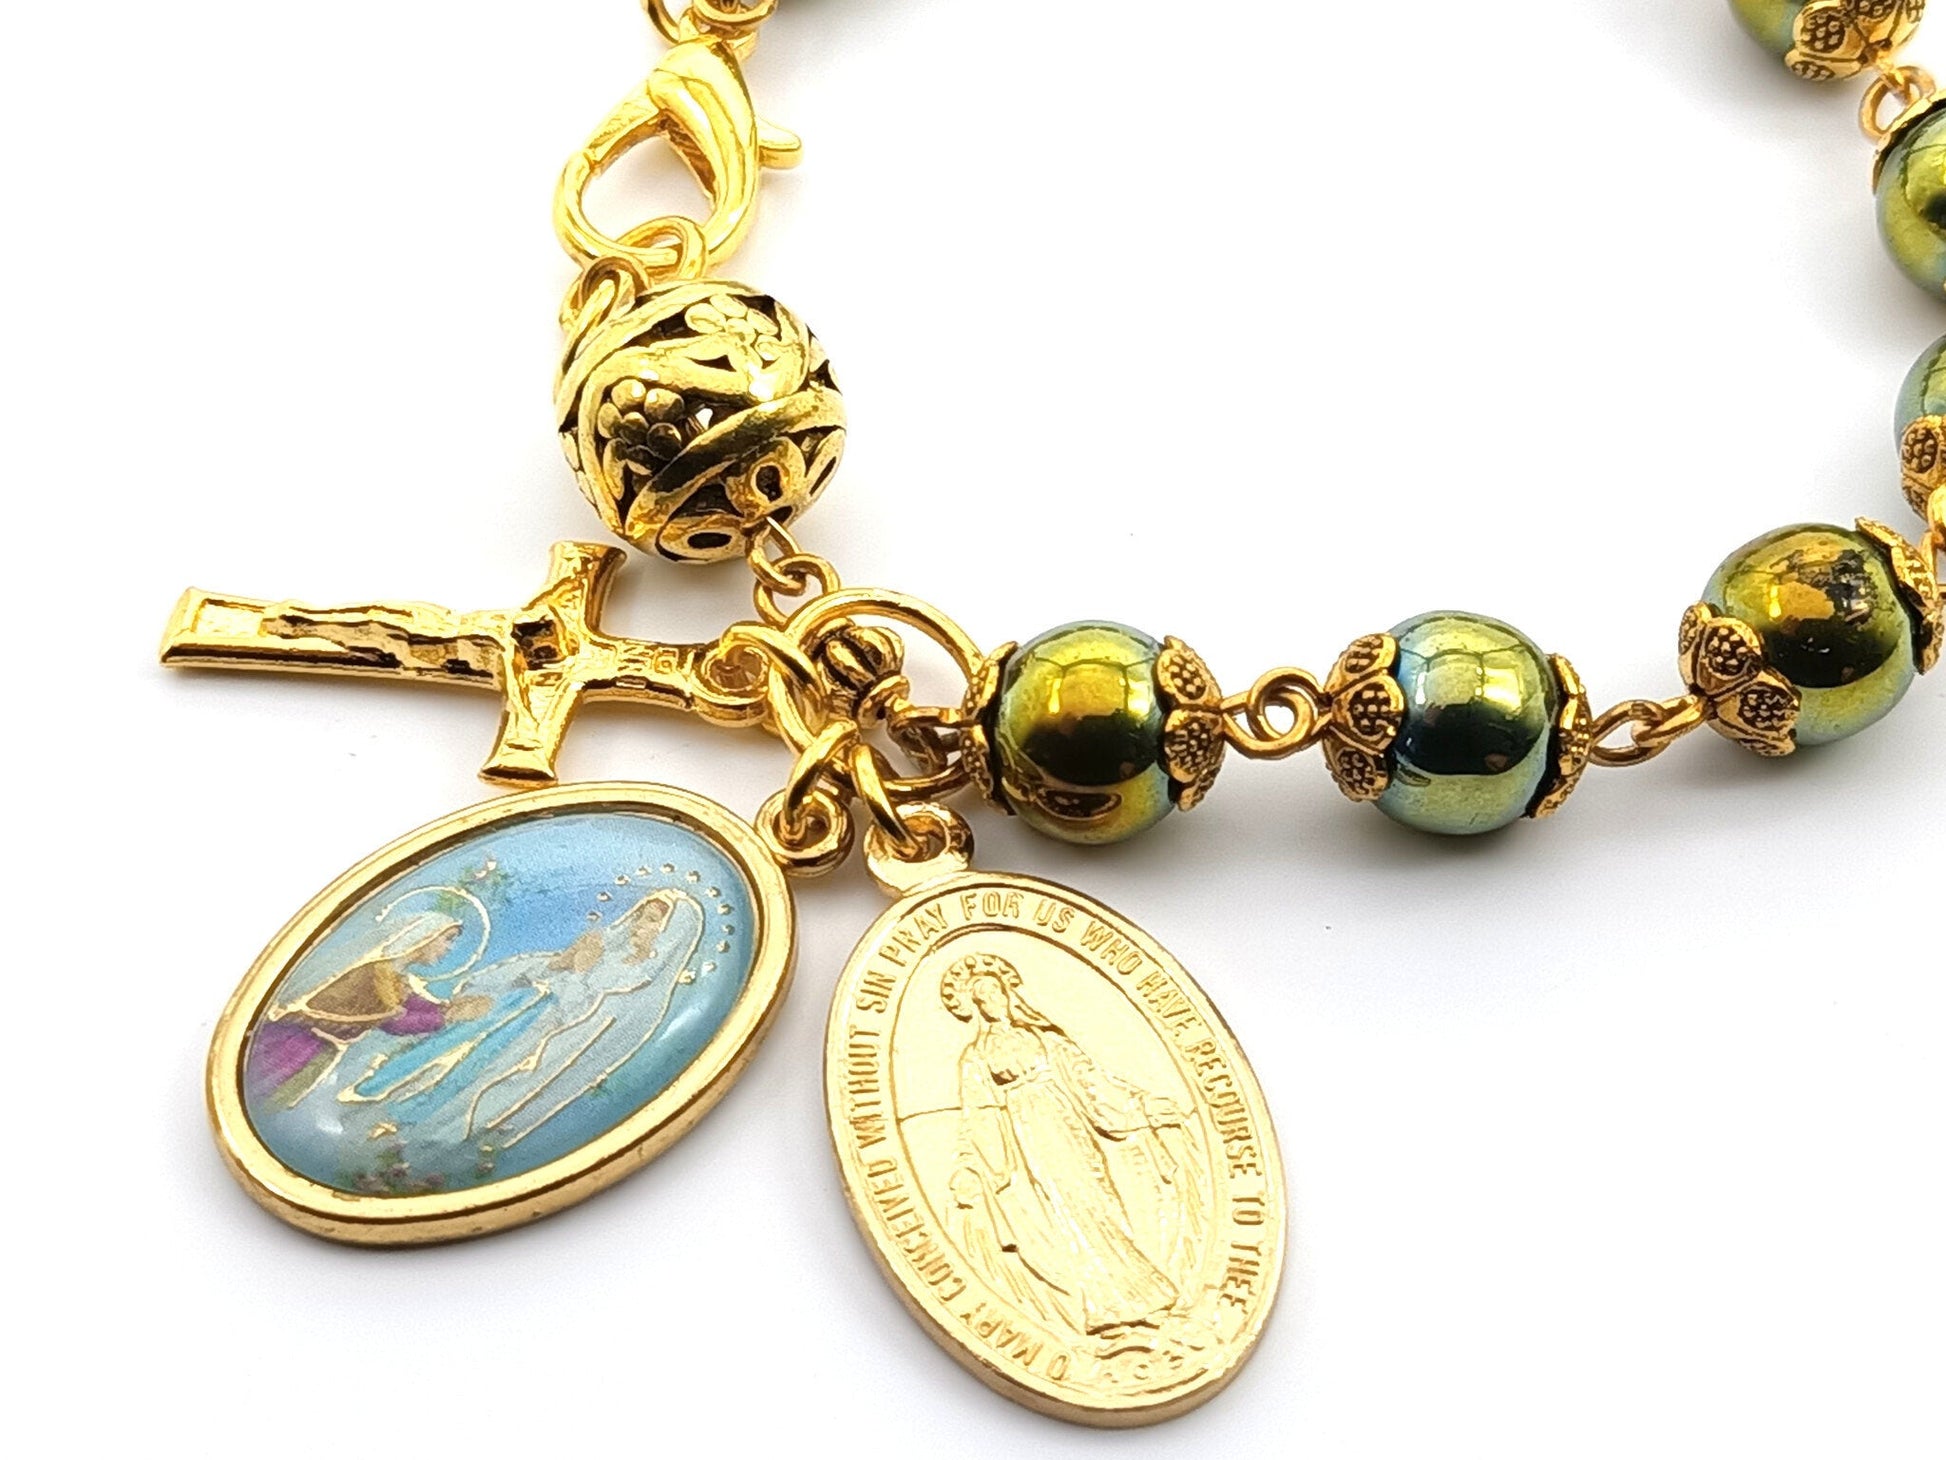 Our Lady of Lourdes unique rosary beads single decade bracelet with green hematite and gold beads, crucifix, picture medal and miraculous medal.